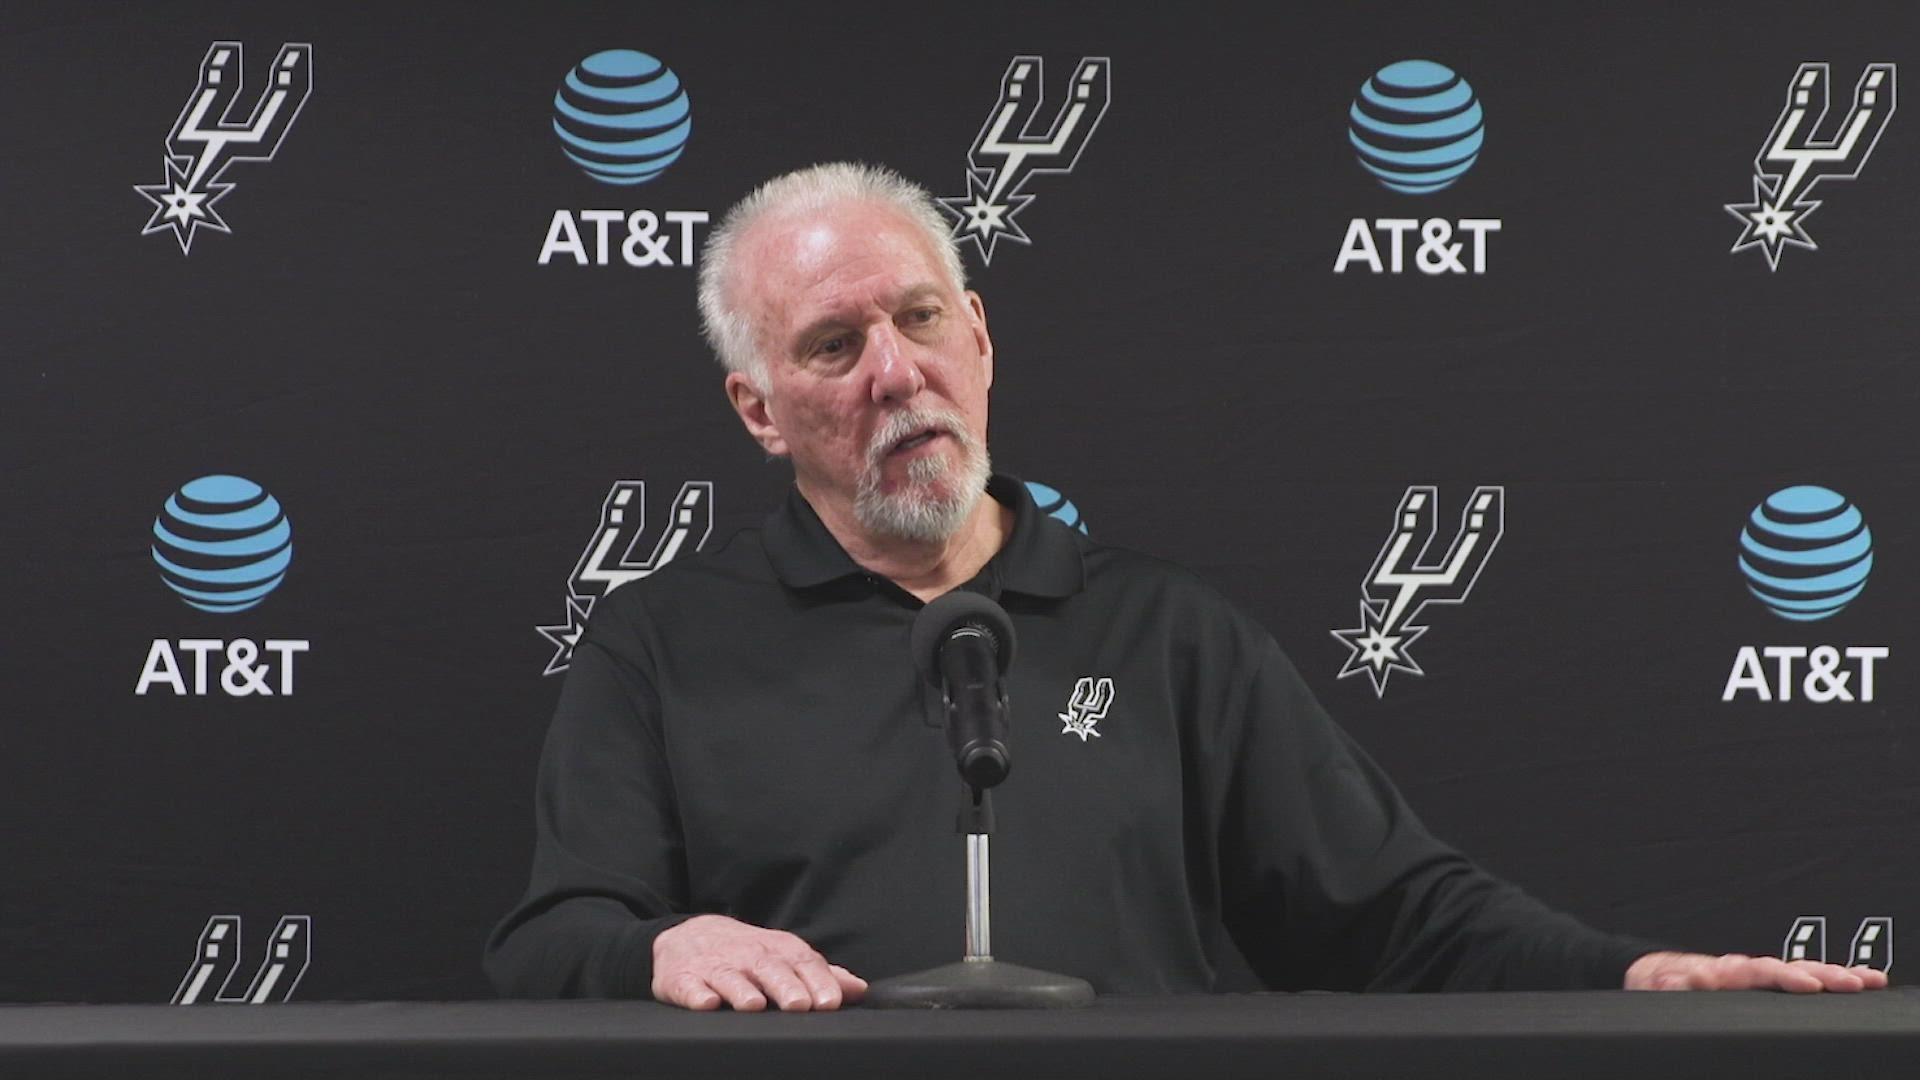 Popovich noted Lonnie Walker IV's clutch three and Josh Primo's solid defense at the buzzer, but said, "other than that, I think we got outplayed."